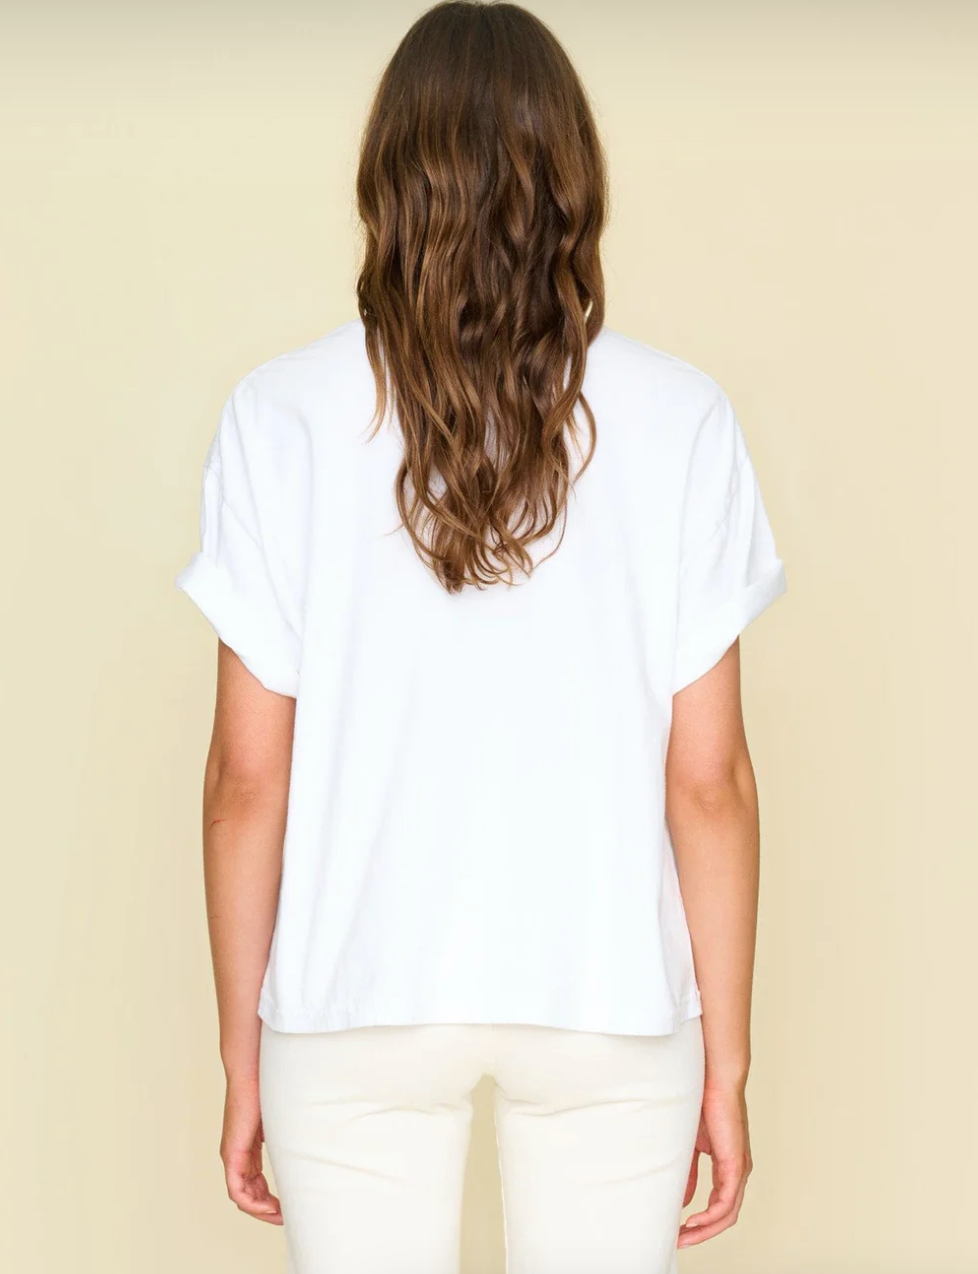 A person with long, wavy brown hair stands facing away from the camera. They are wearing a White Palmer Tee from Xirena and light-colored pants. The backdrop hints at minimalist elegance, reminiscent of a cozy bungalow in Scottsdale, Arizona, with its plain, light beige color.